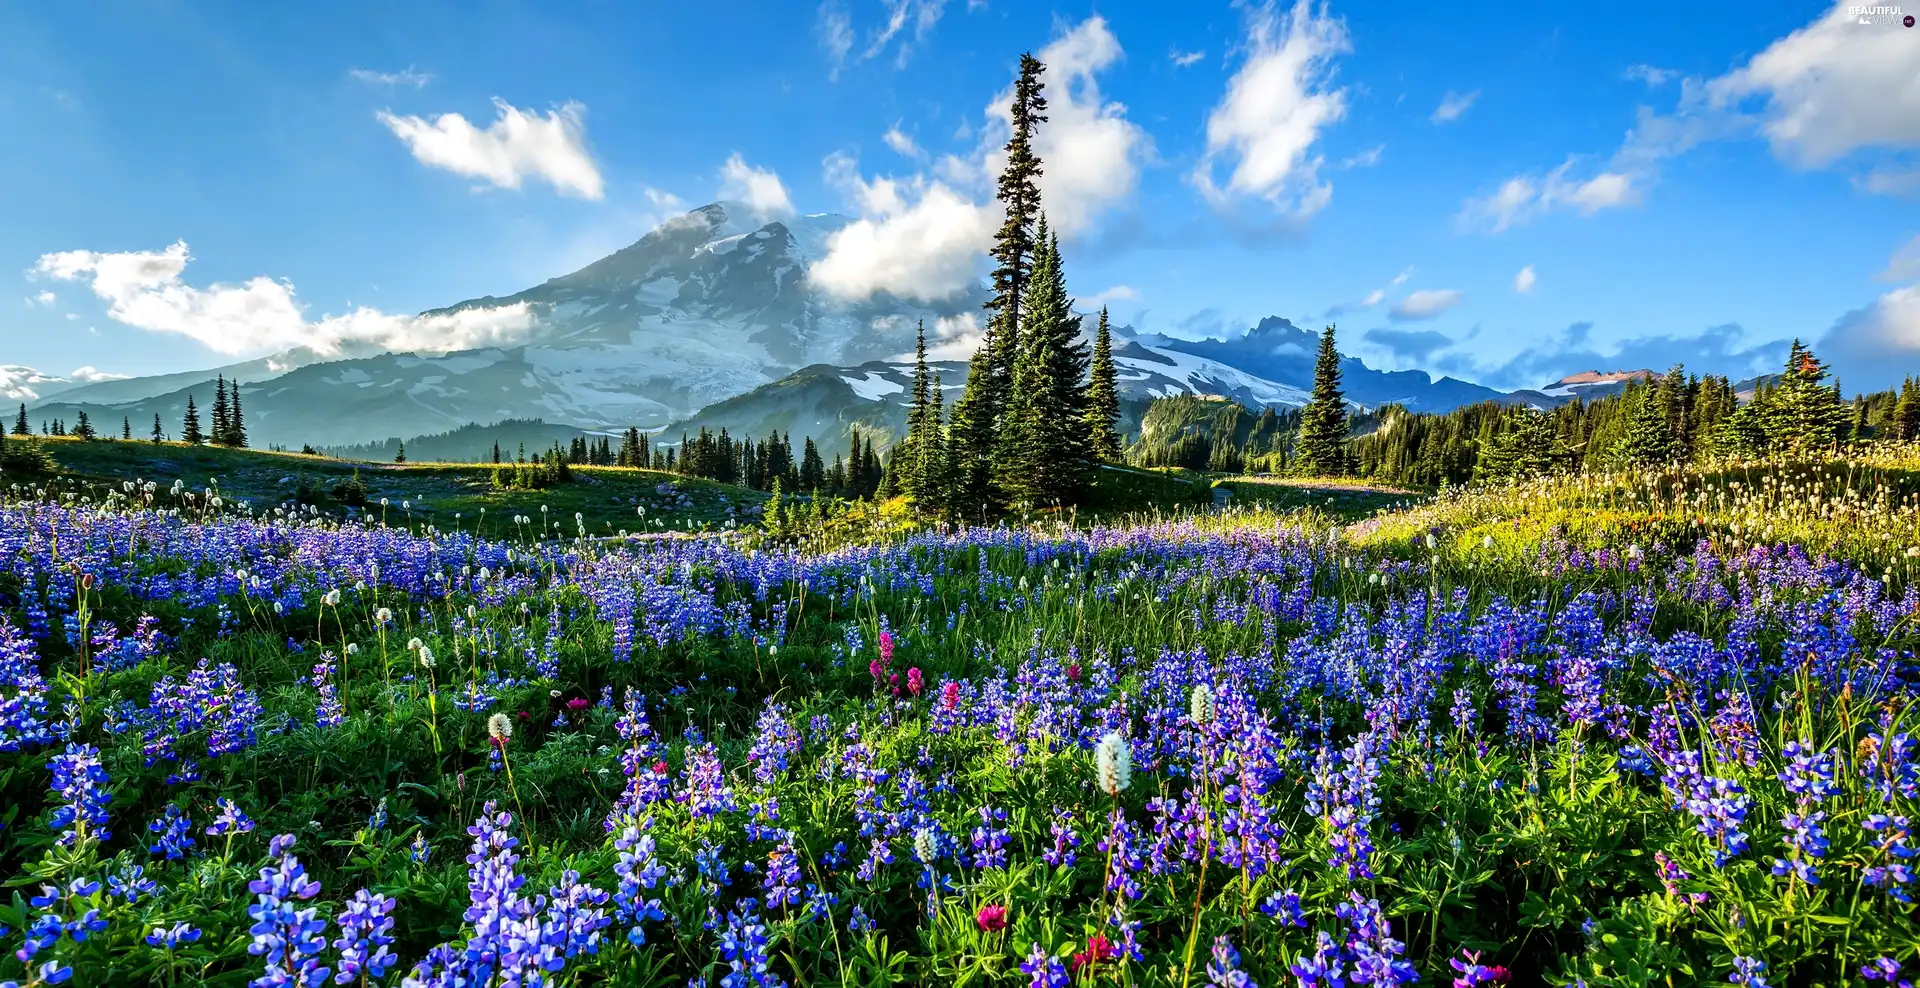 Meadow, Mountains, woods, Flowers